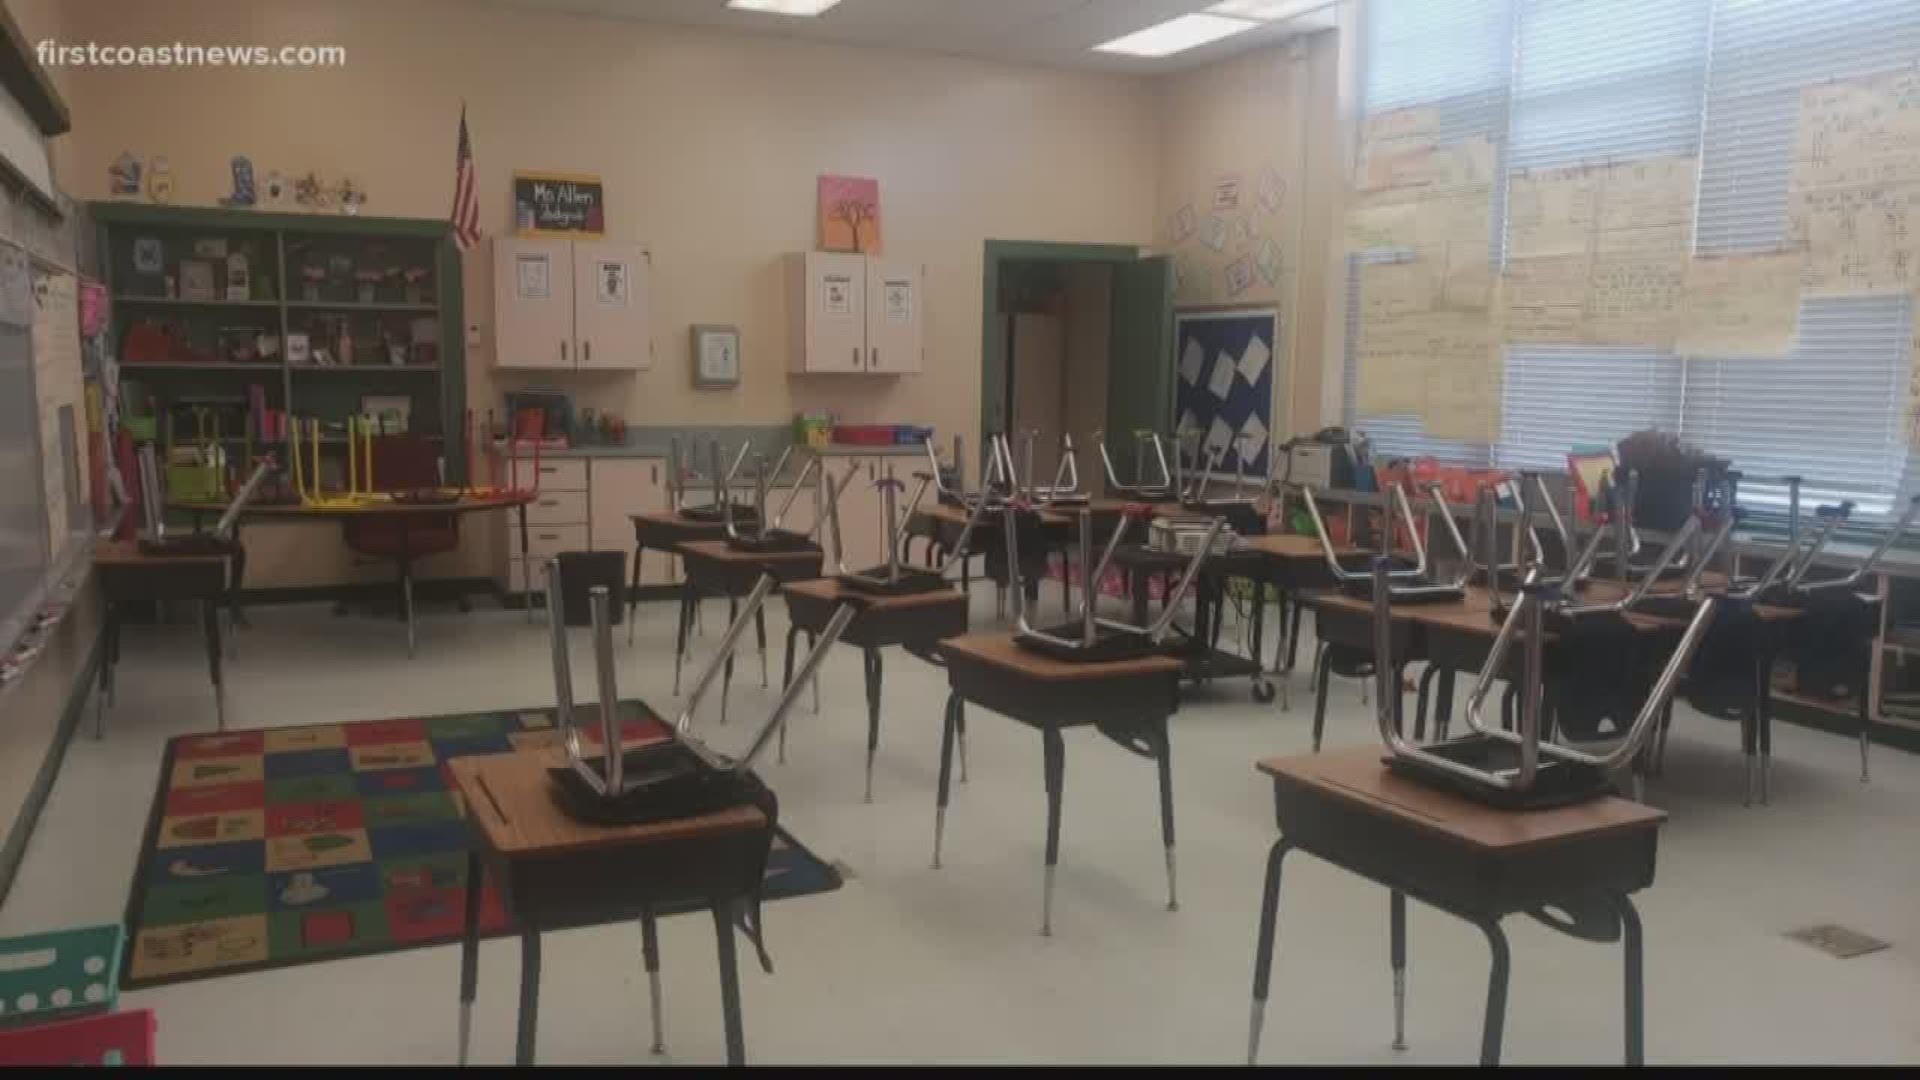 The second day of Duval HomeRoom had some more hiccups, but one teacher says she's trying to keep her students on a normal school schedule.